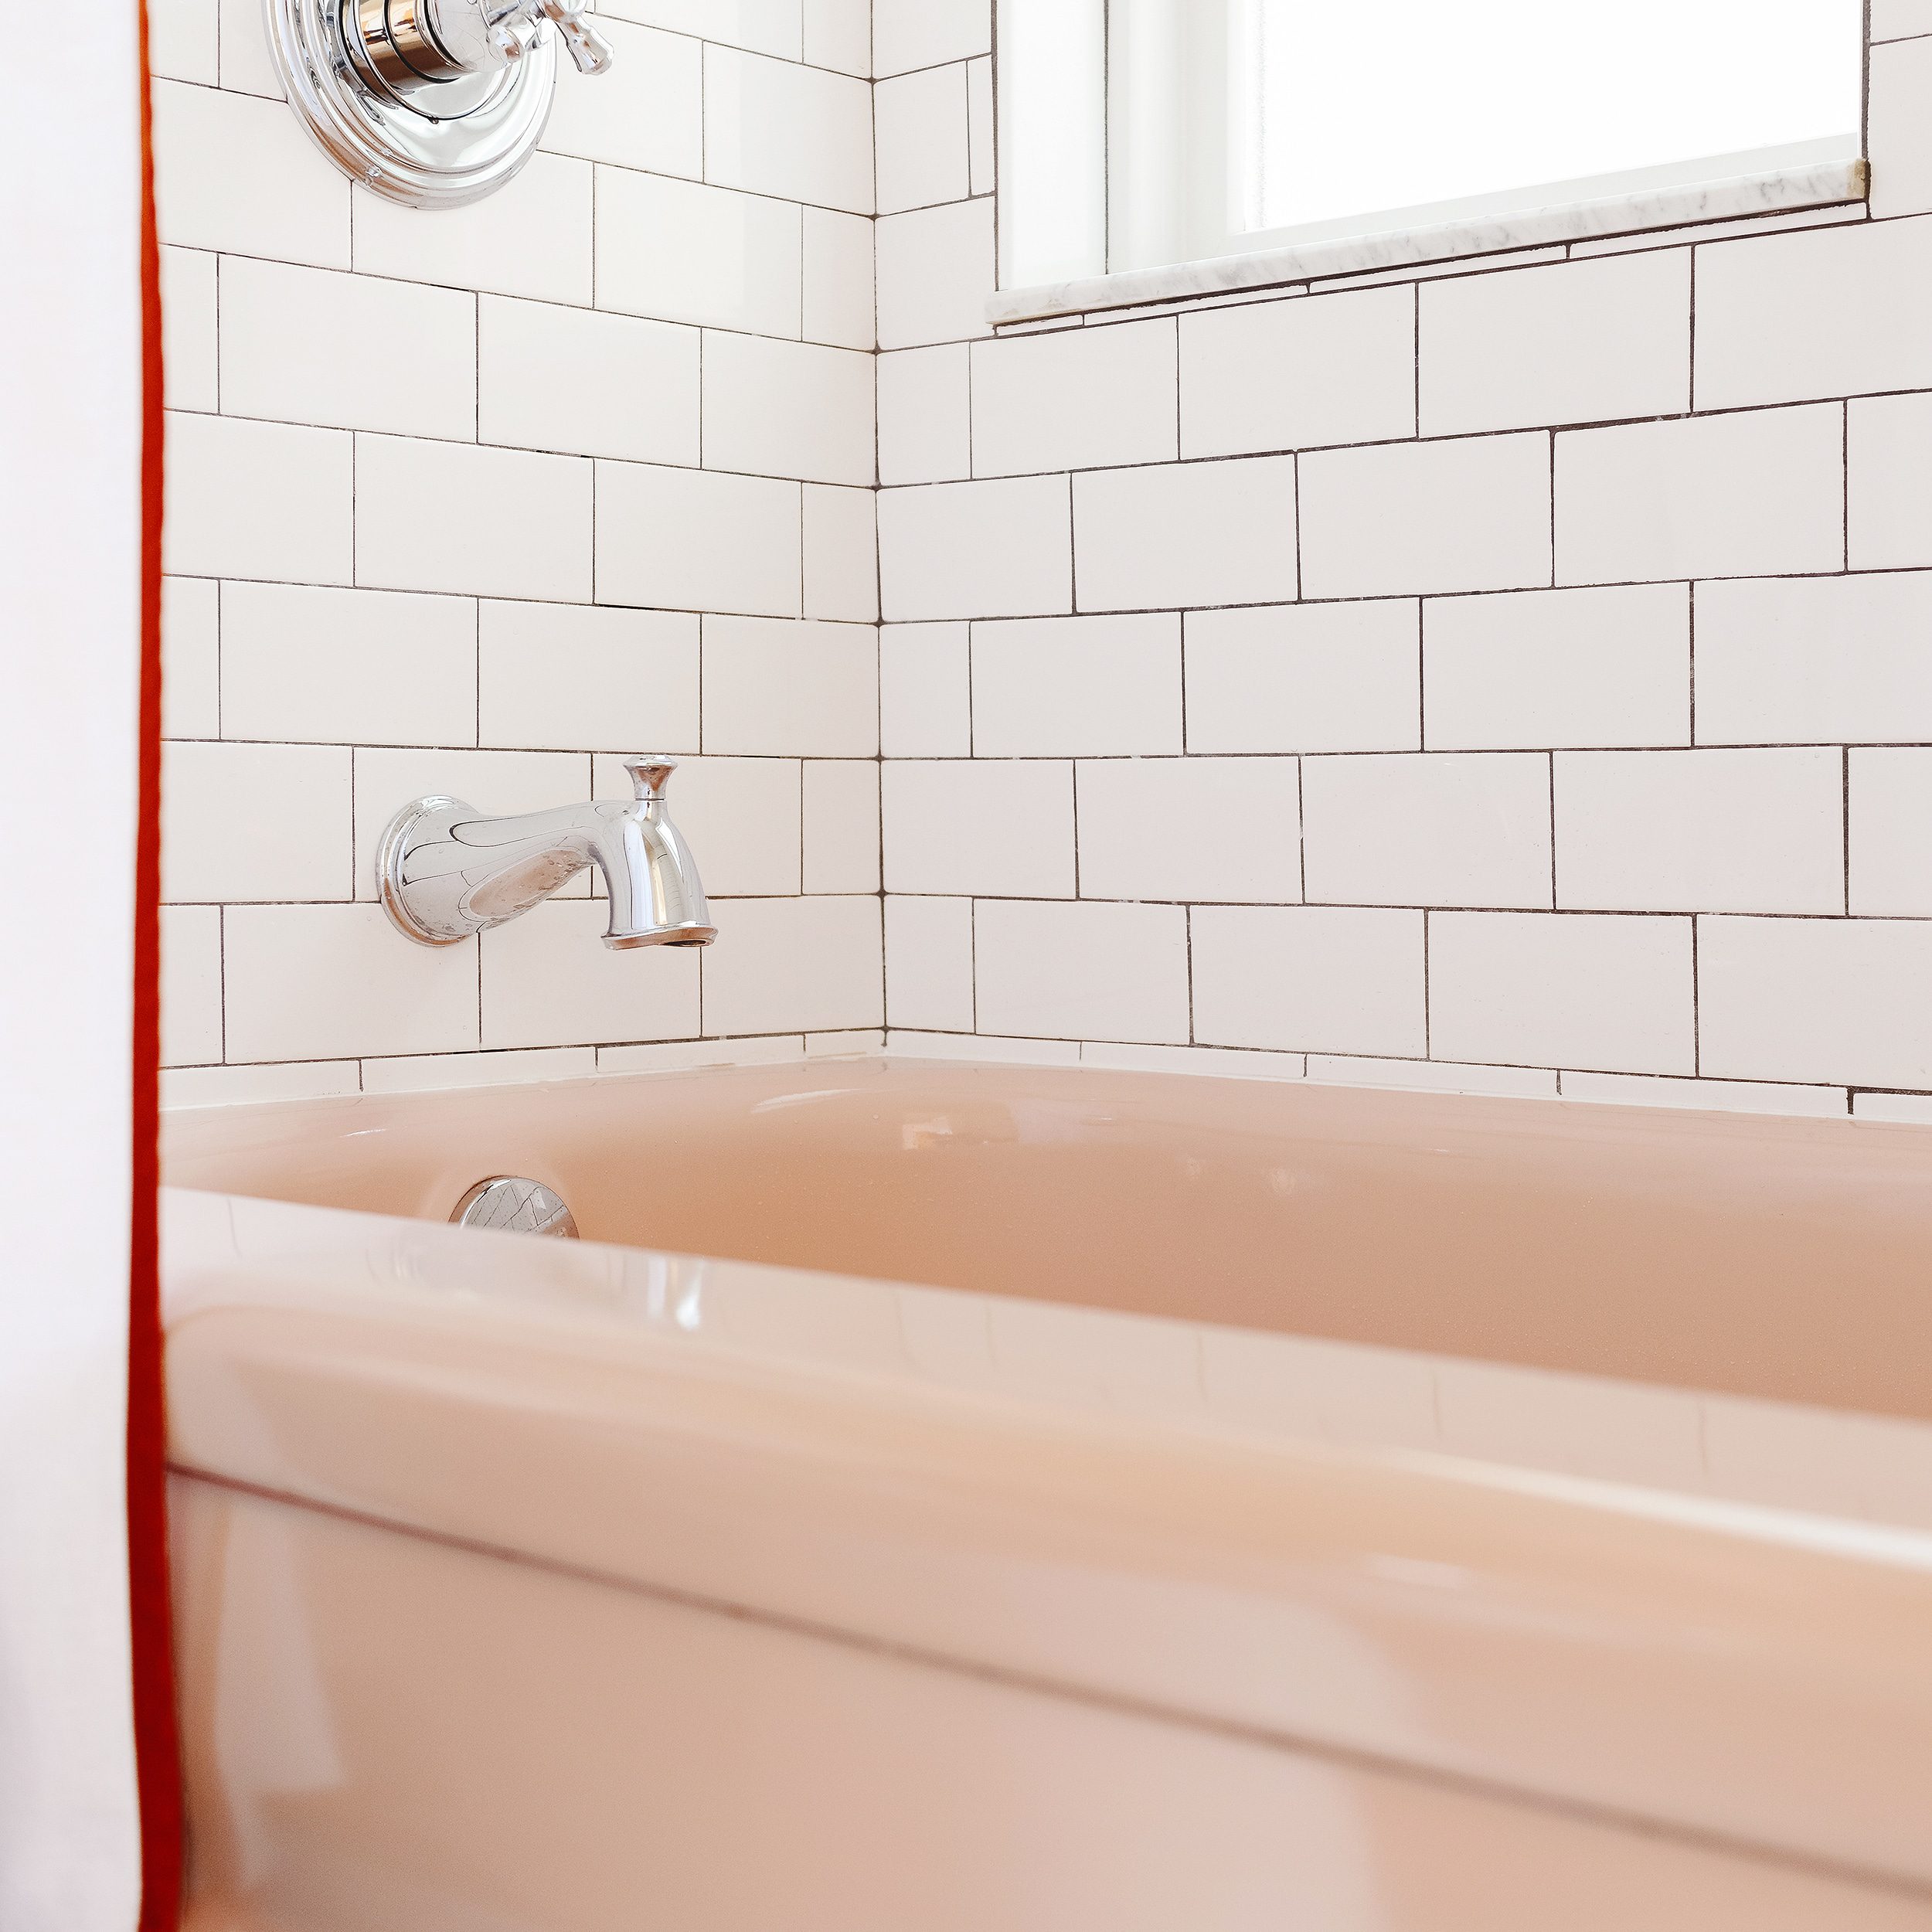 Can You Reglaze A Pink Bathtub, How To Change The Color Of Your Bathtub